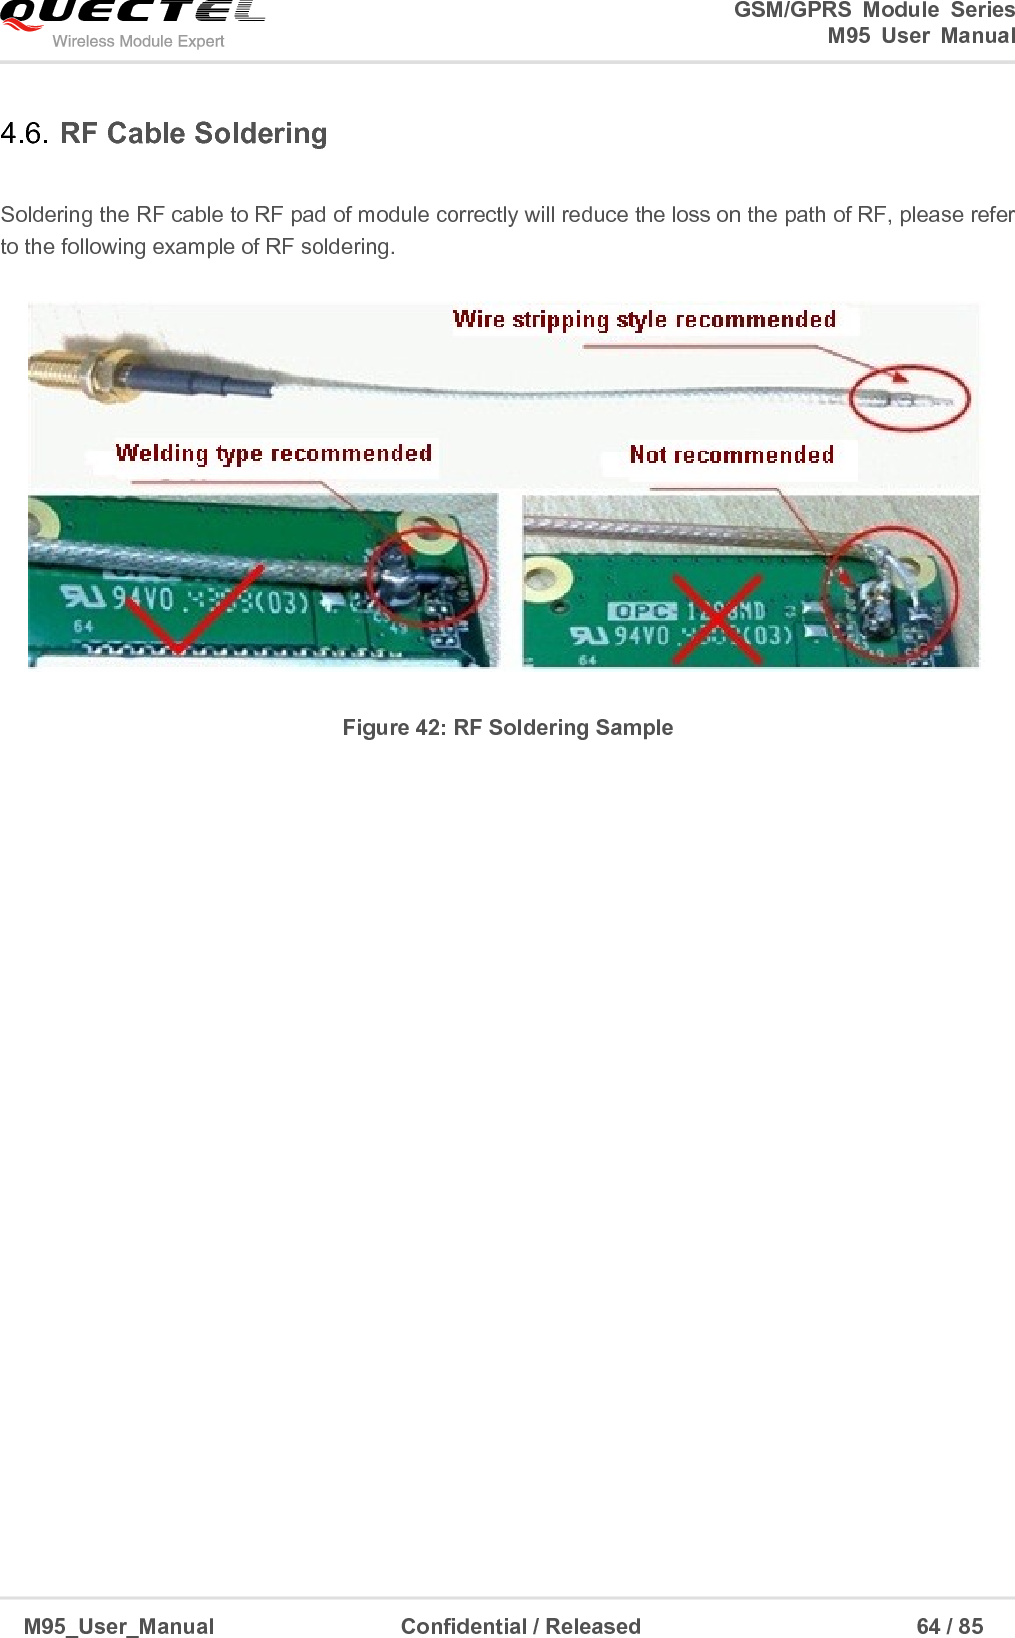                                                                              GSM/GPRS  Module  Series                                                                 M95  User  Manual  M95_User_Manual                                  Confidential / Released                             64 / 85    4.6. RF Cable Soldering  Soldering the RF cable to RF pad of module correctly will reduce the loss on the path of RF, please refer to the following example of RF soldering.  Figure 42: RF Soldering Sample    